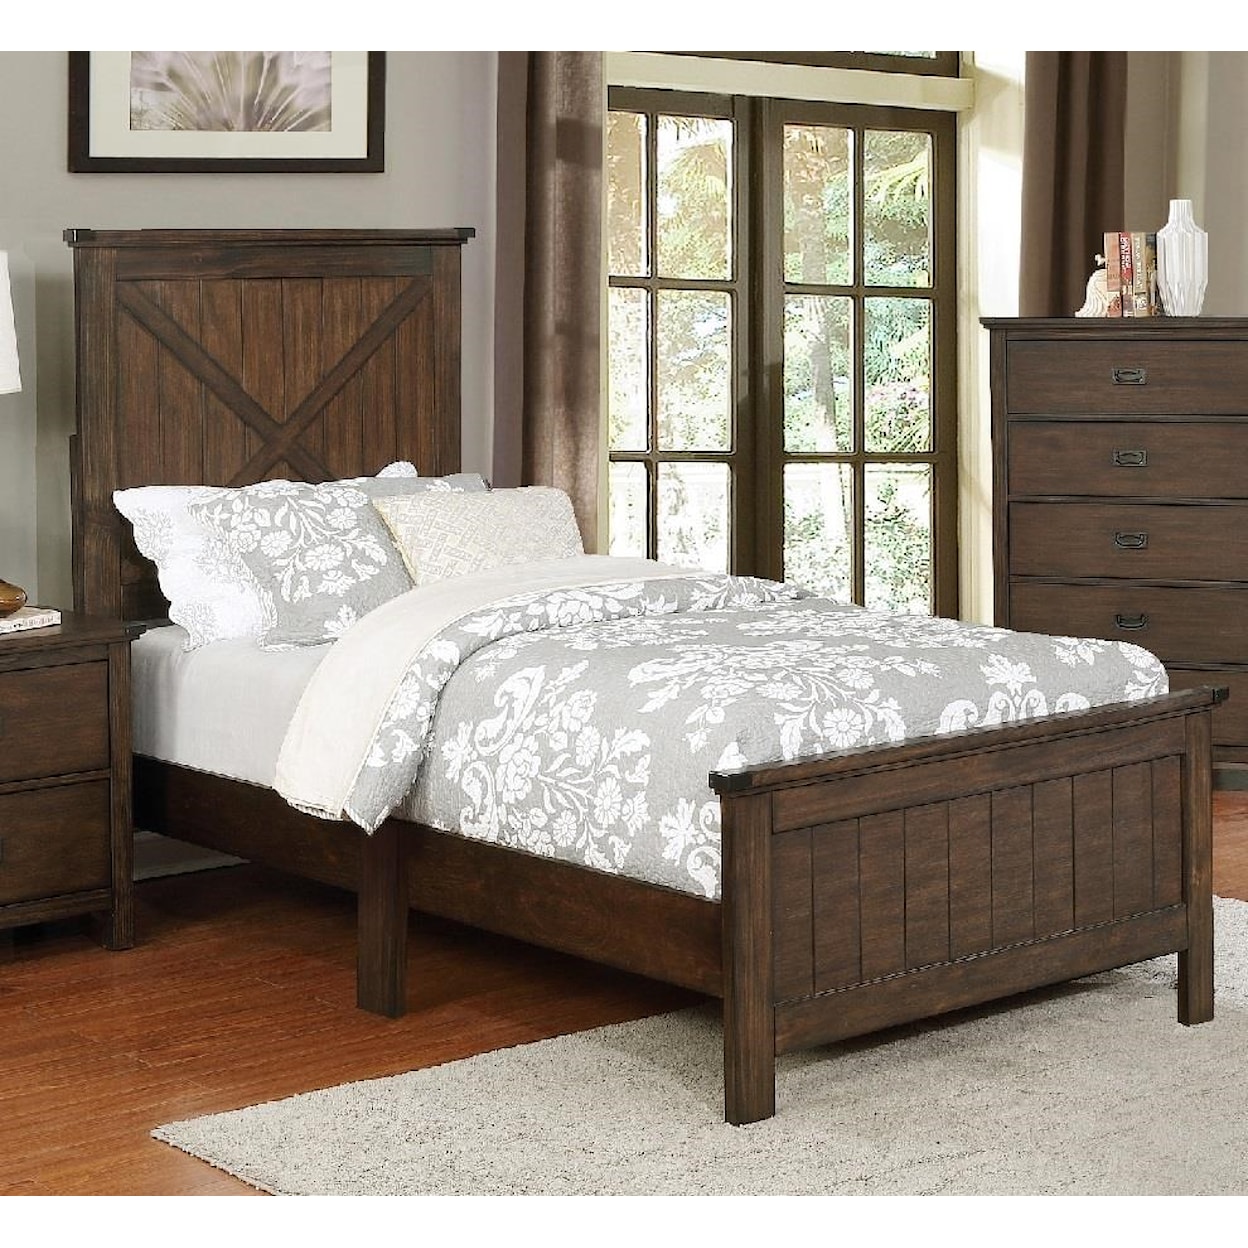 Exclusive Carter Twin Bed